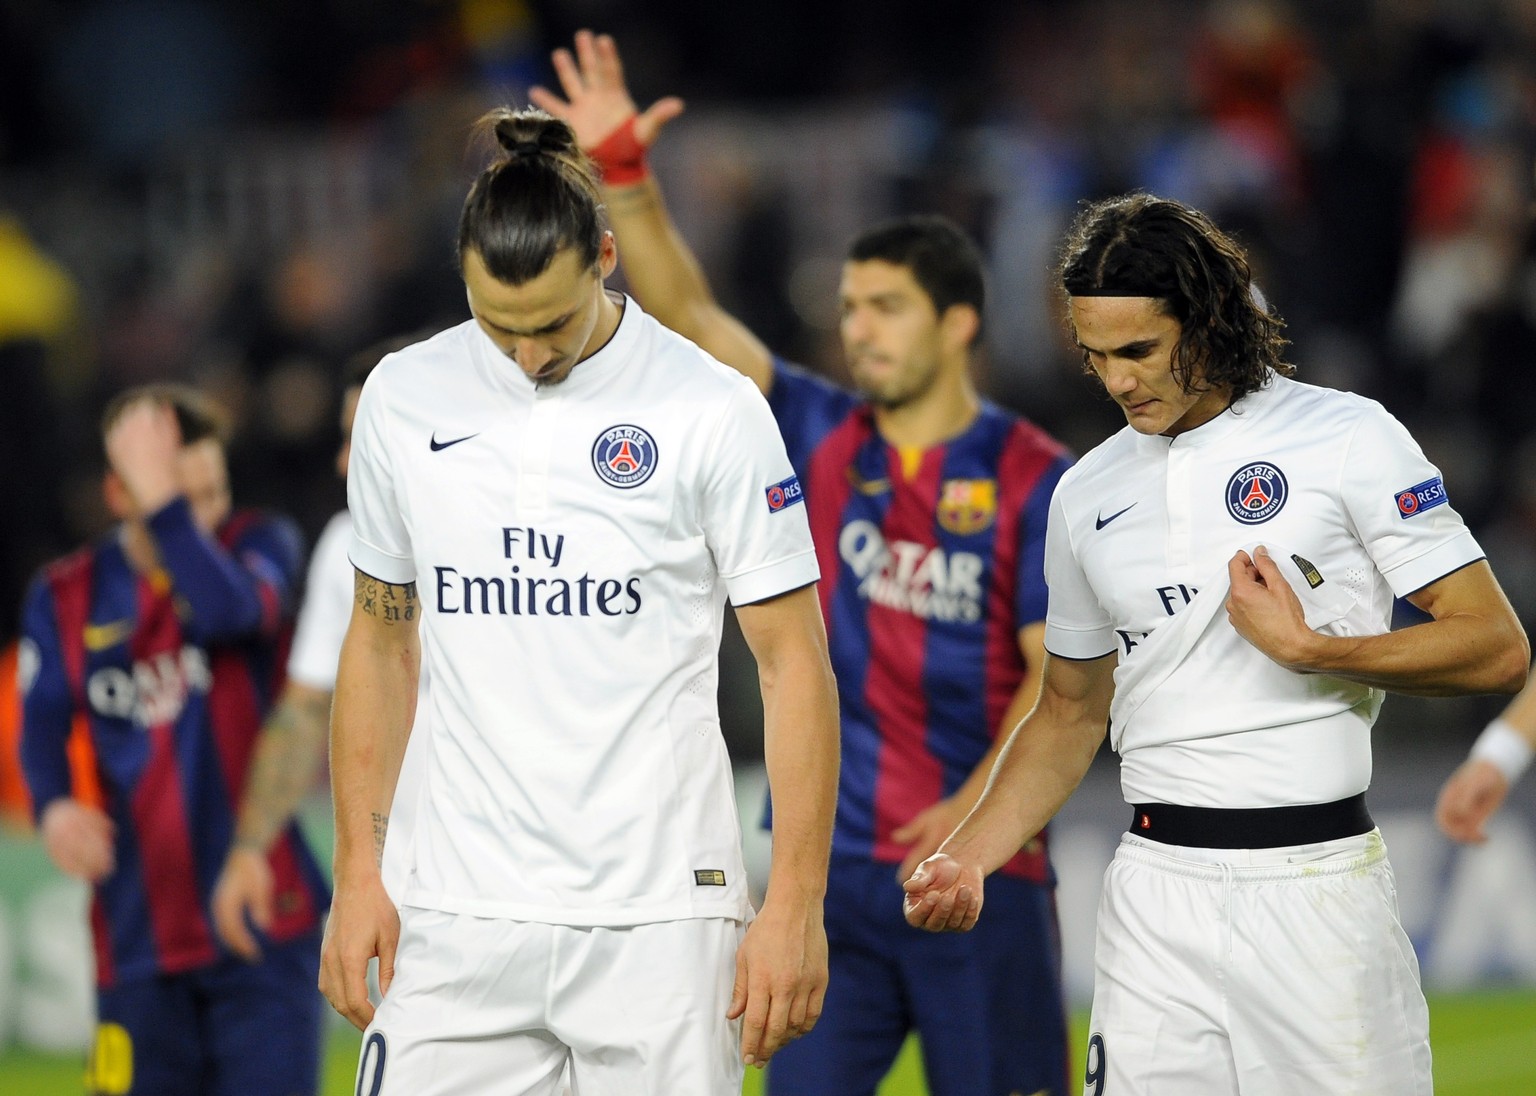 PSG players, Zlatan Ibrahimovic and Edinson Cavani, right, leave the pitch at the end of the Group F Champions League soccer match between FC Barcelona and PSG at the Camp Nou stadium in Barcelona, Sp ...